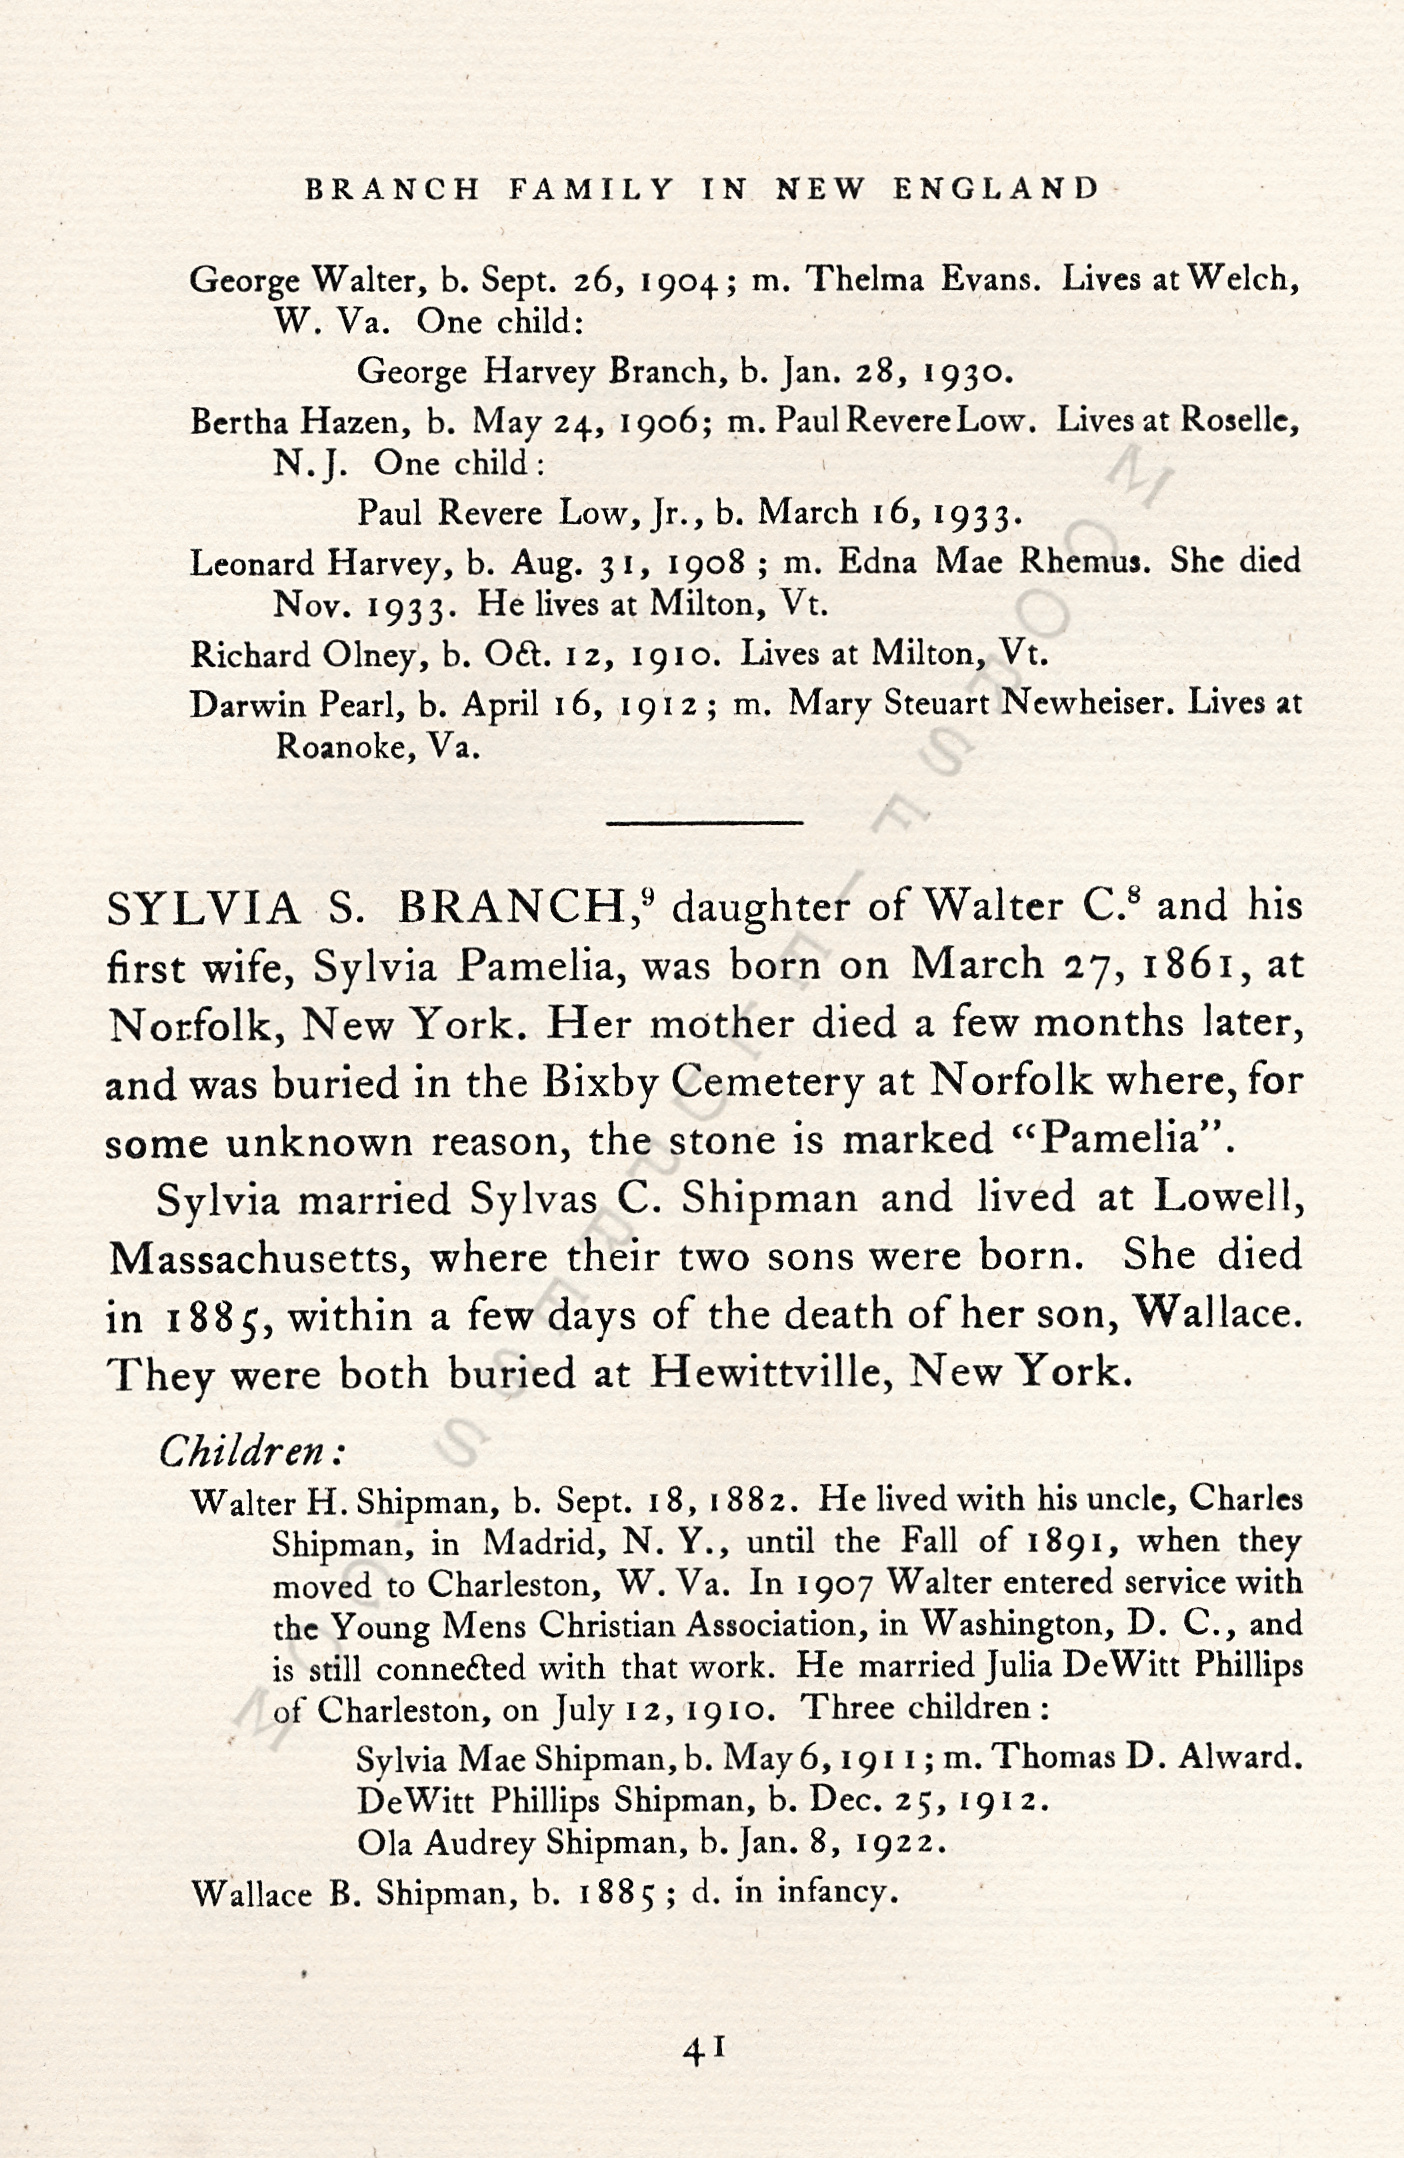 The Branch
                      Family of New England, The Line of William Farrand
                      Branch